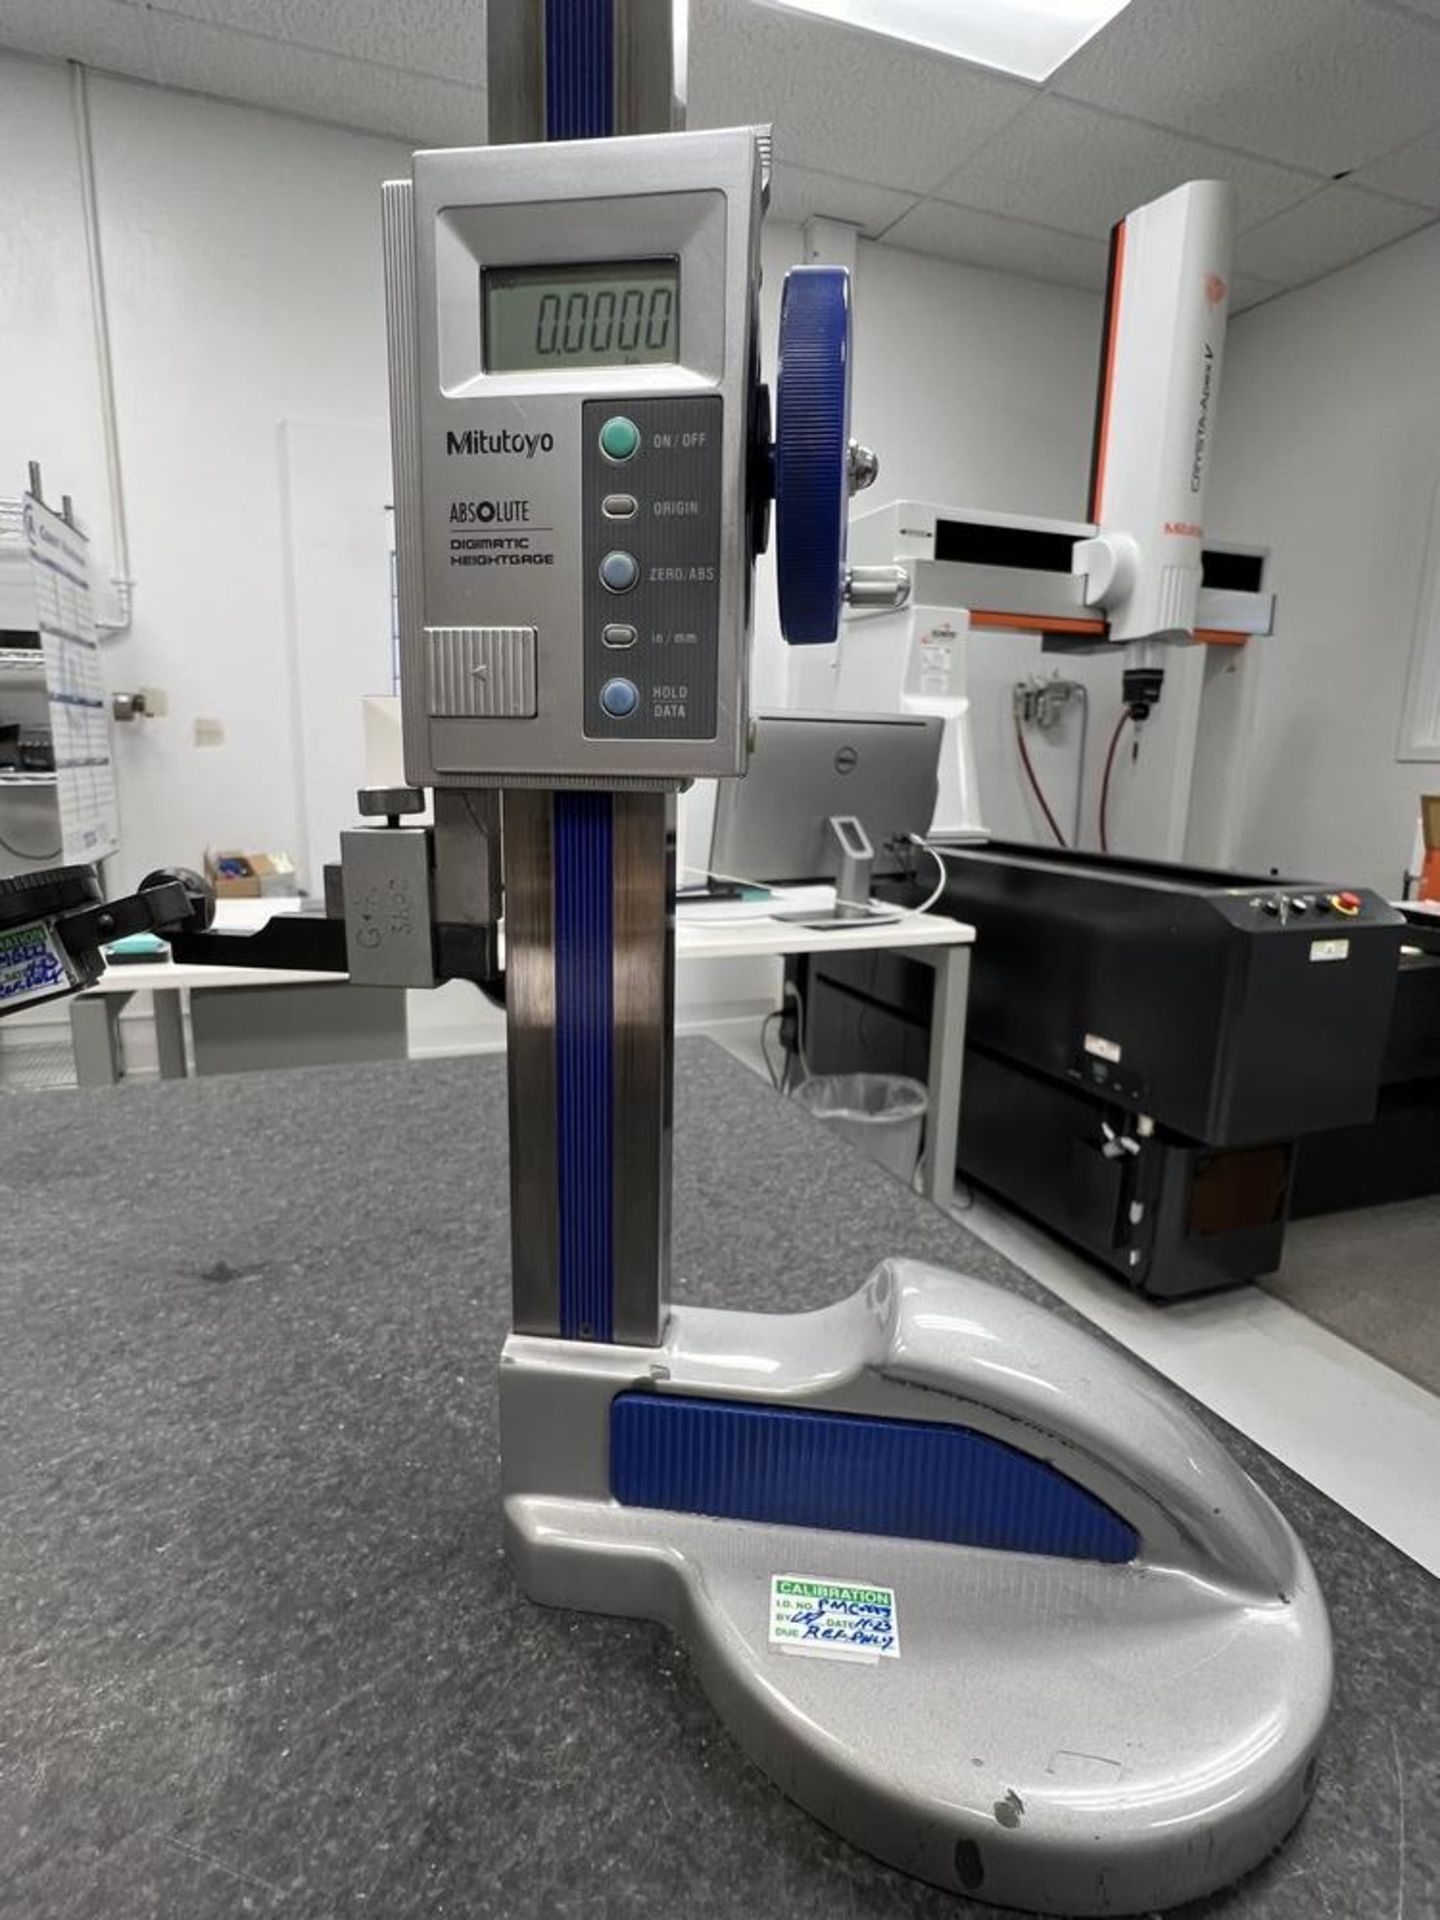 Mitutoyo Absolute Digimatic Height Gage 0-18", Digital Does Not Include Dial Caliper - Image 3 of 5